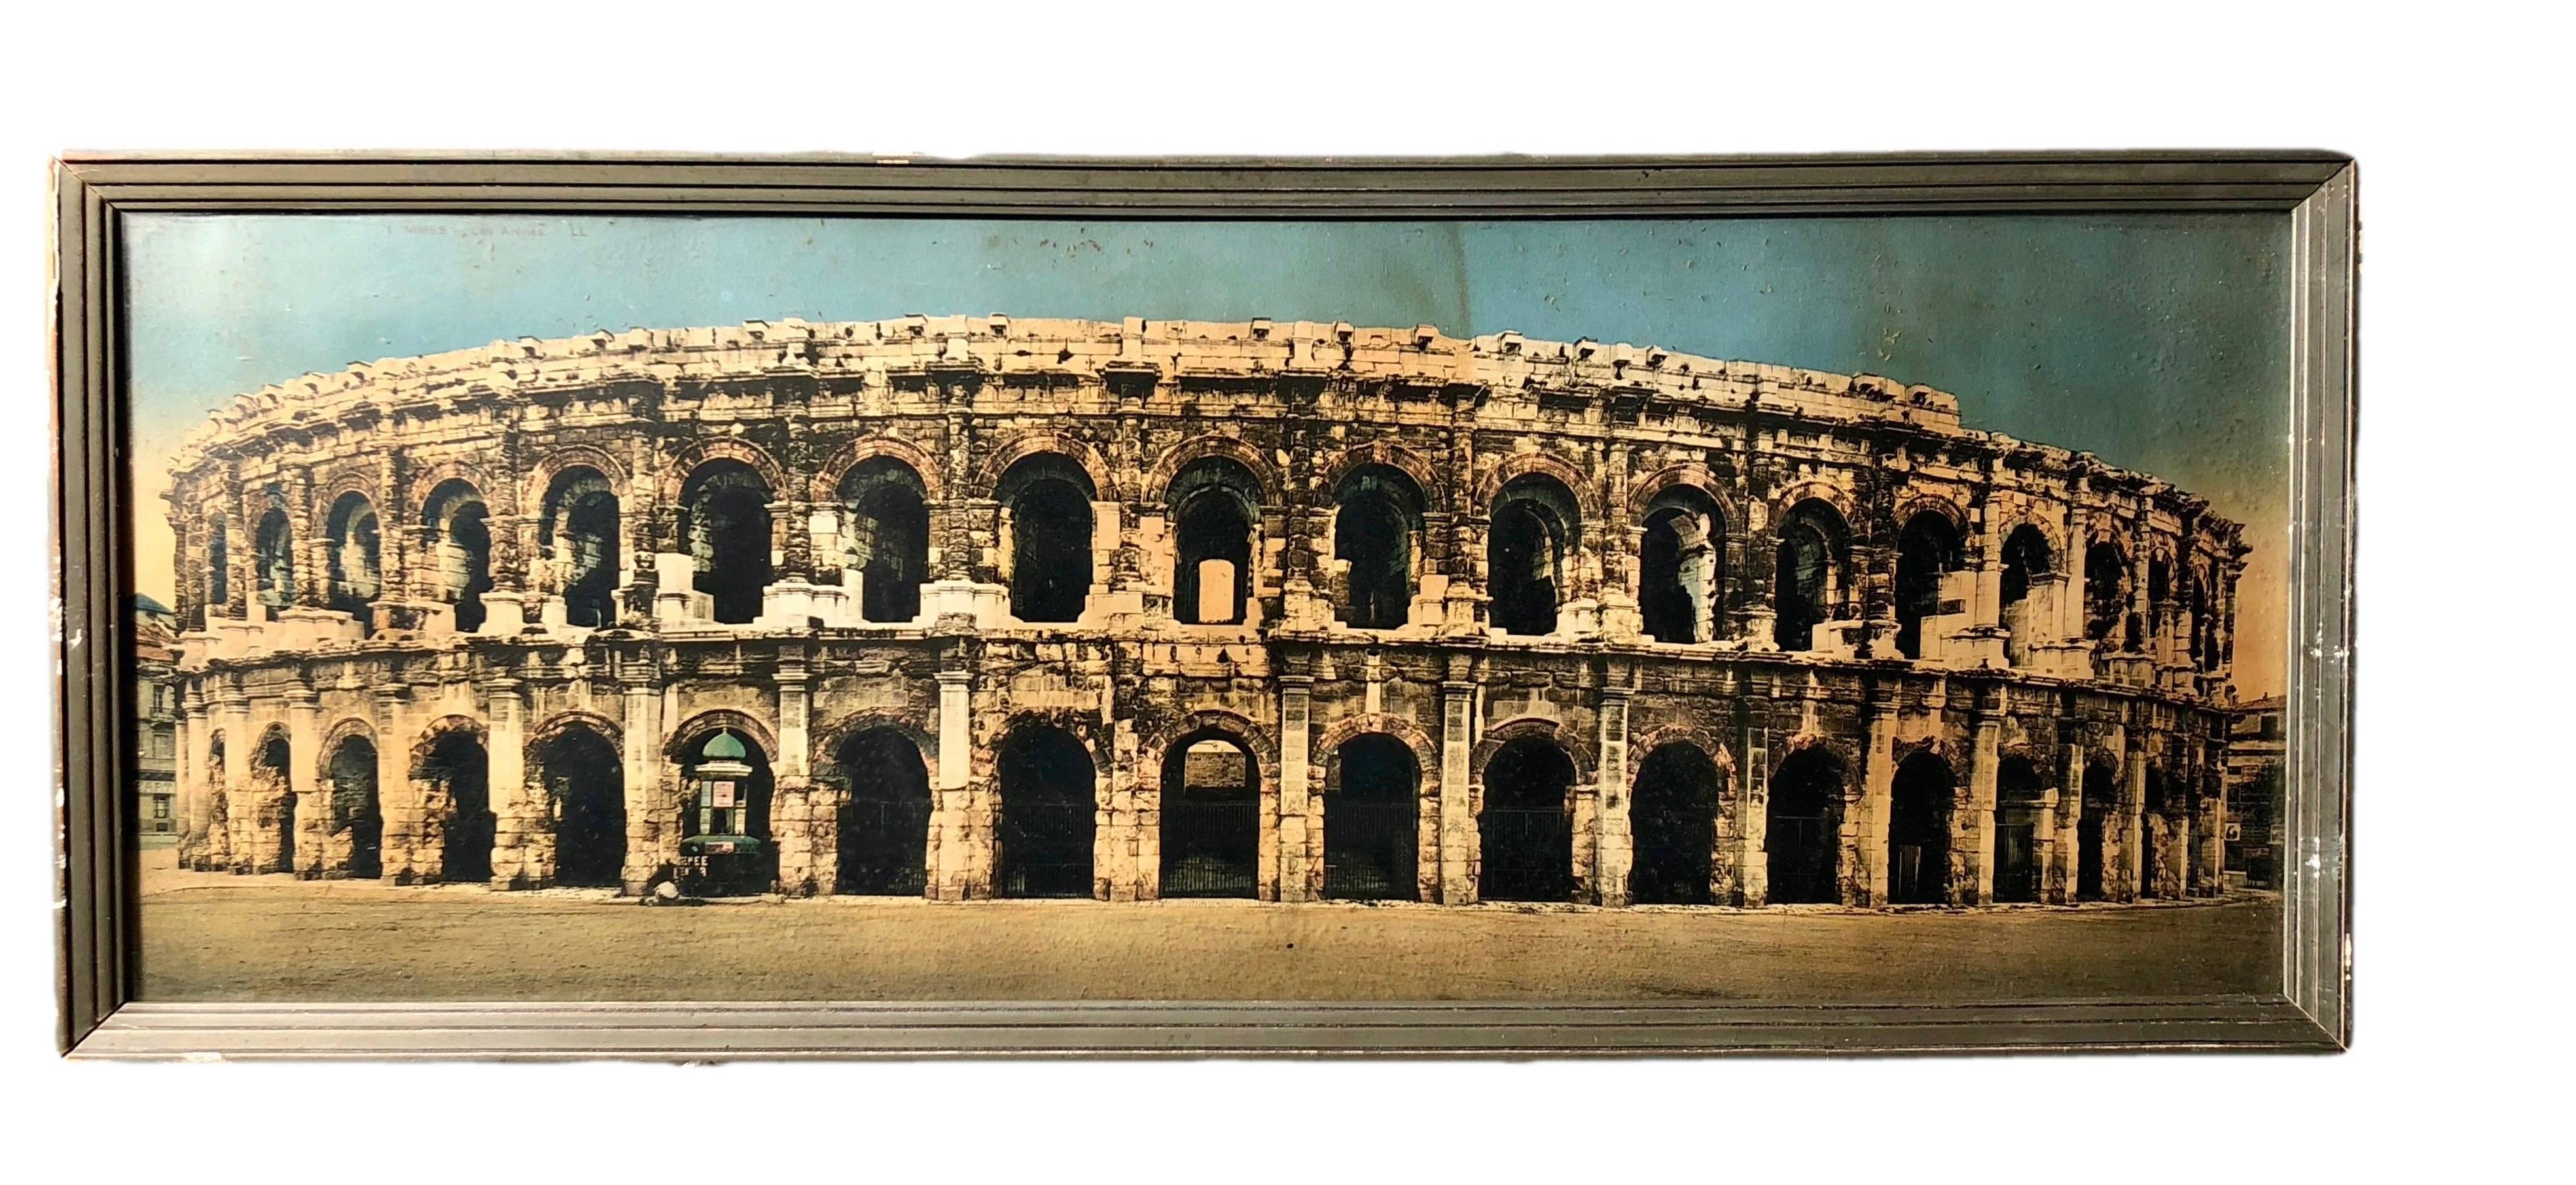 These are a set of two lovely French colorized souvenir photos. Both are framed in grey hand-painted wooden frames and are of the city of Nimes, showing the Roman arenas and the fountain gardens.
    